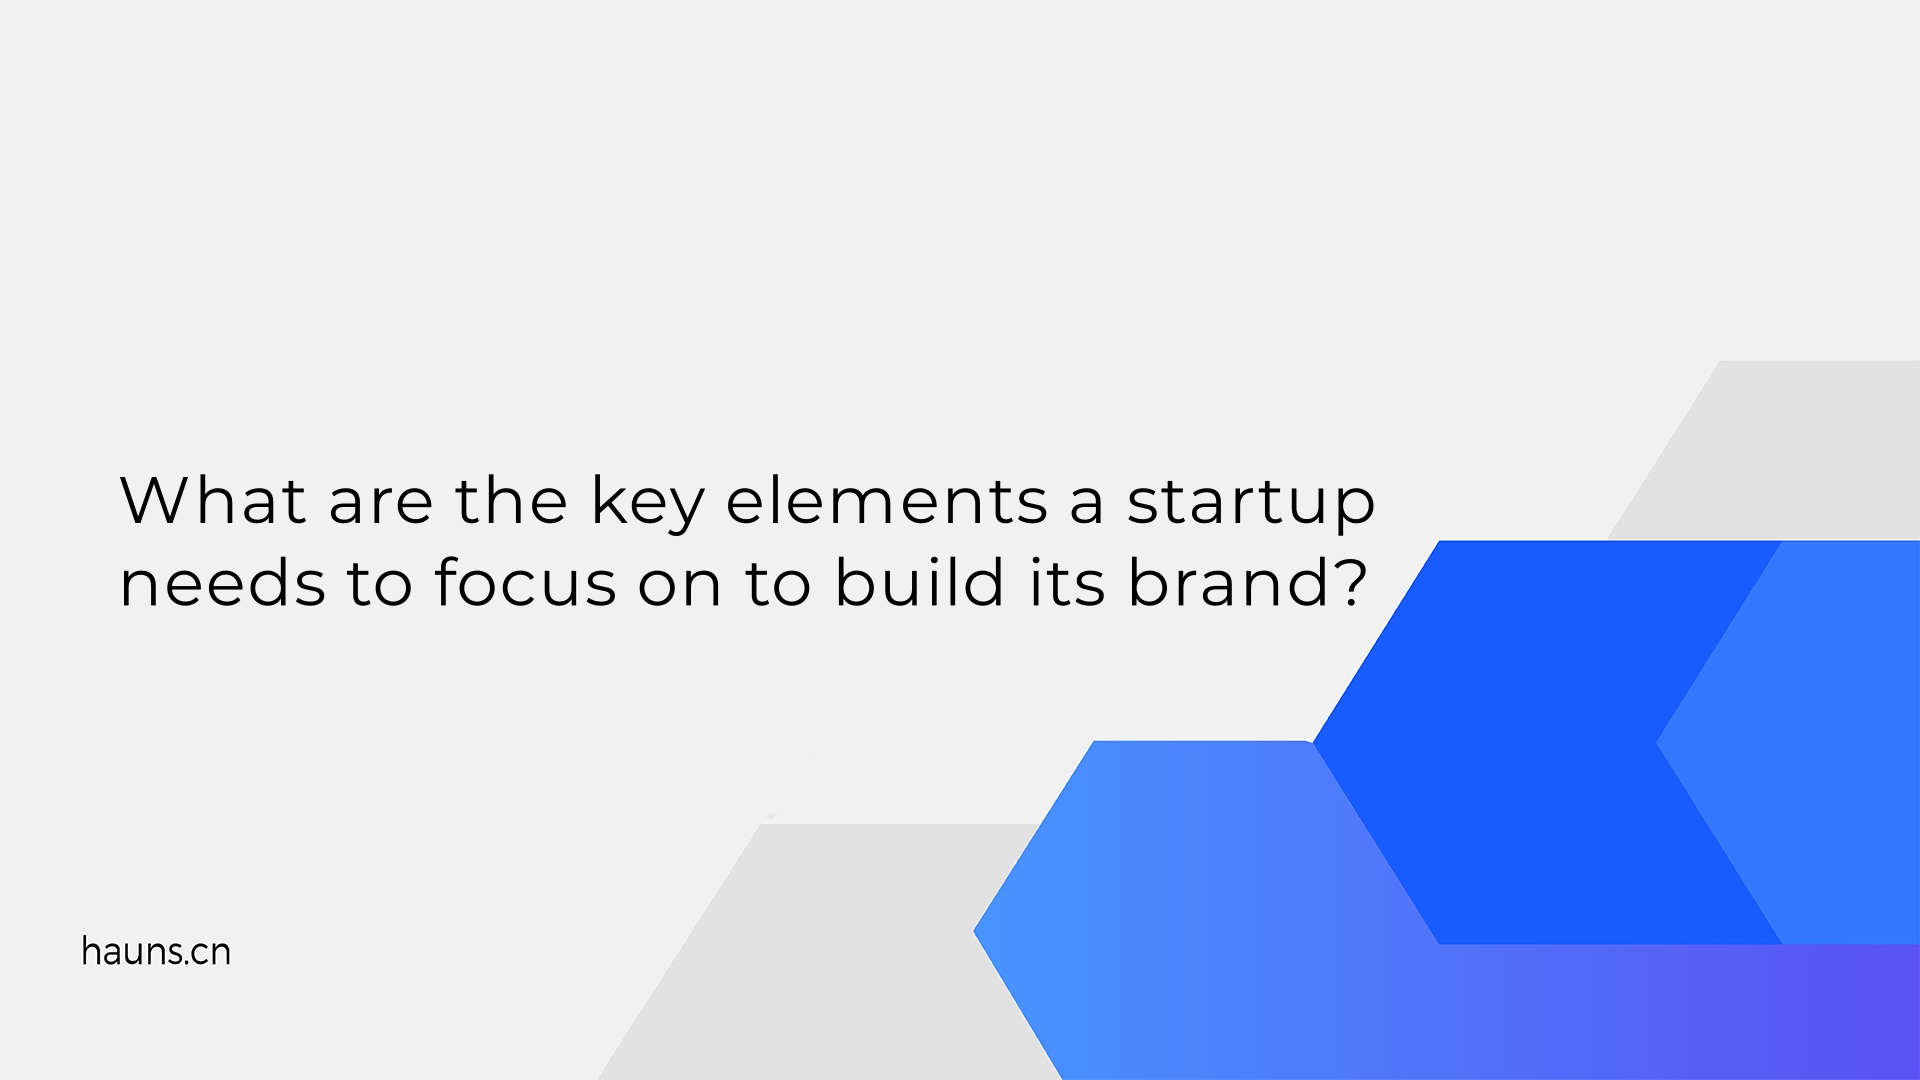 What are the key elements a startup needs to focus on to build its brand?